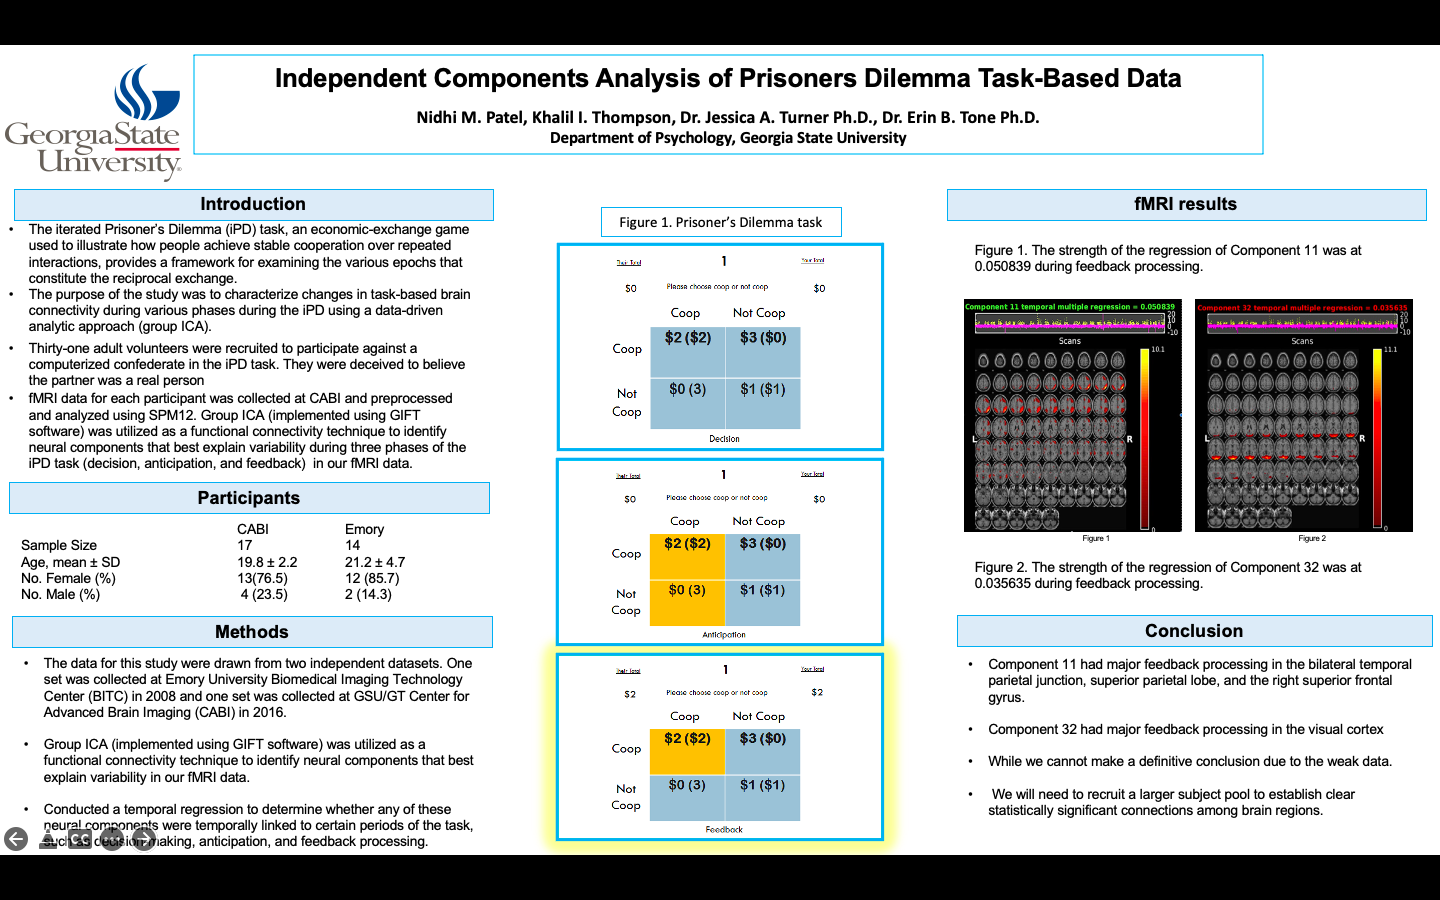 Showcase Image for Independent Components Analysis of Prisoners Dilemma Task-Based Data